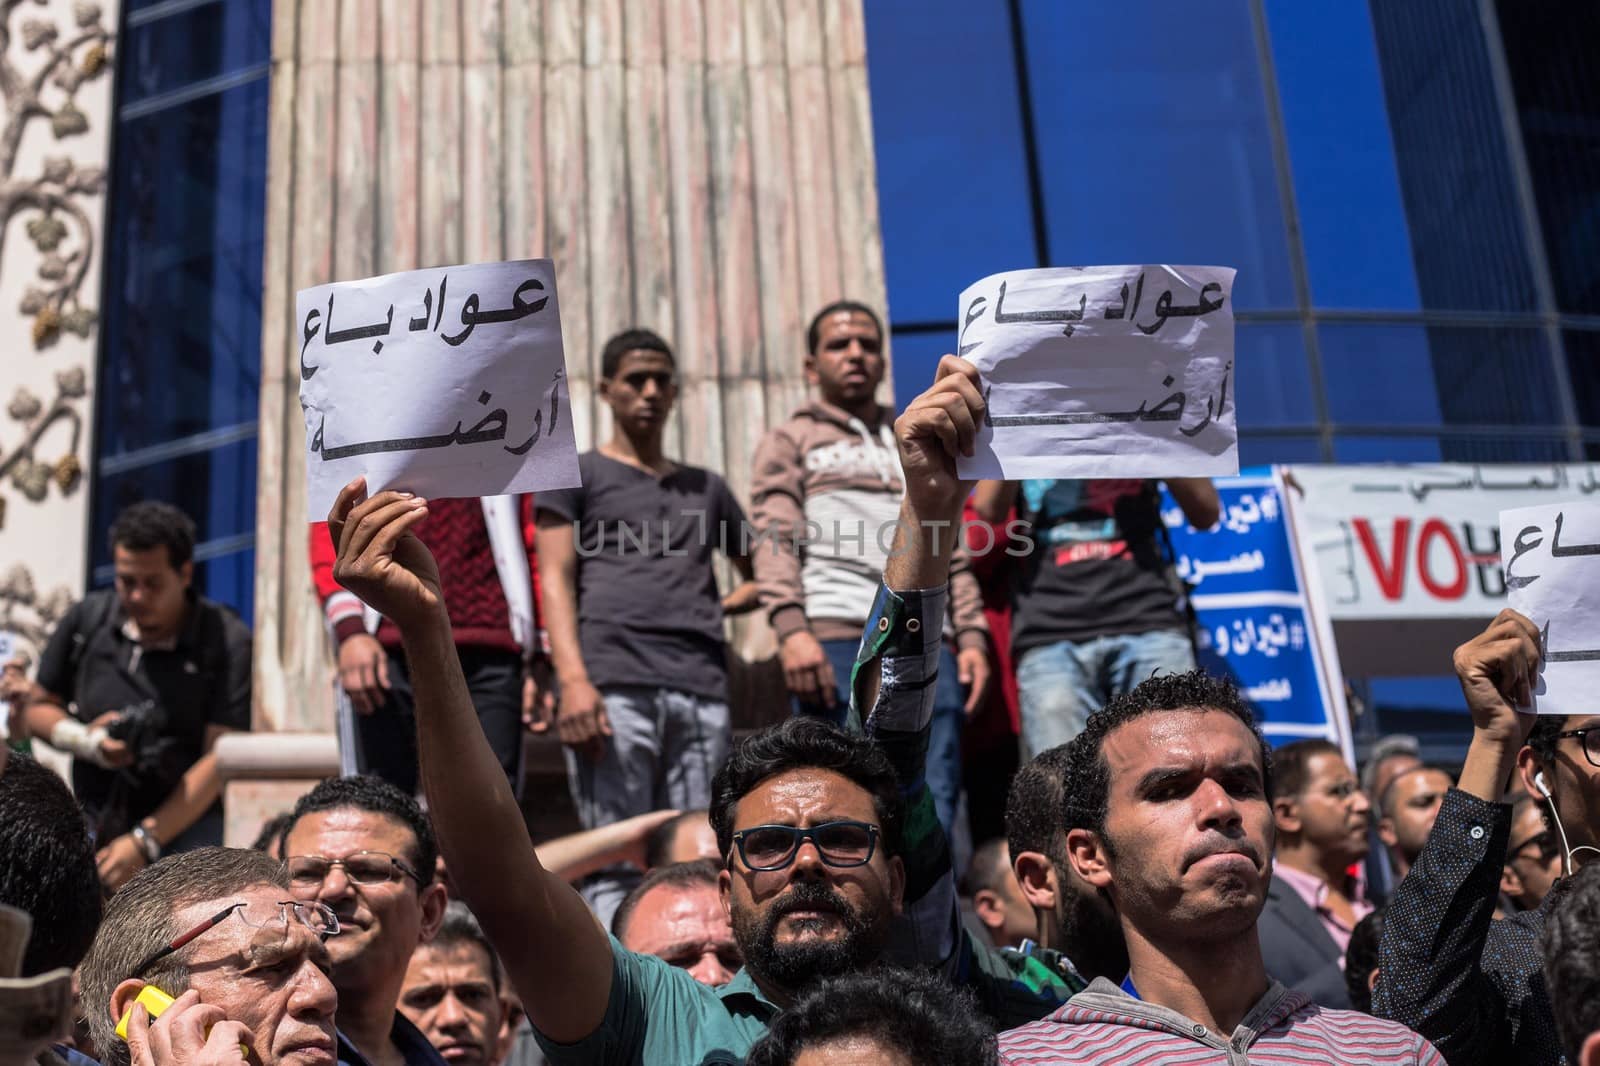 EGYPT, Cairo: People chant slogans and hold signs during a protest against the decision to hand over control of two strategic Red Sea islands, namely Tiran and Sanafir, to Saudi Arabia, in front of the Syndicate of Journalists building, in Cairo, on April 15, 2016.